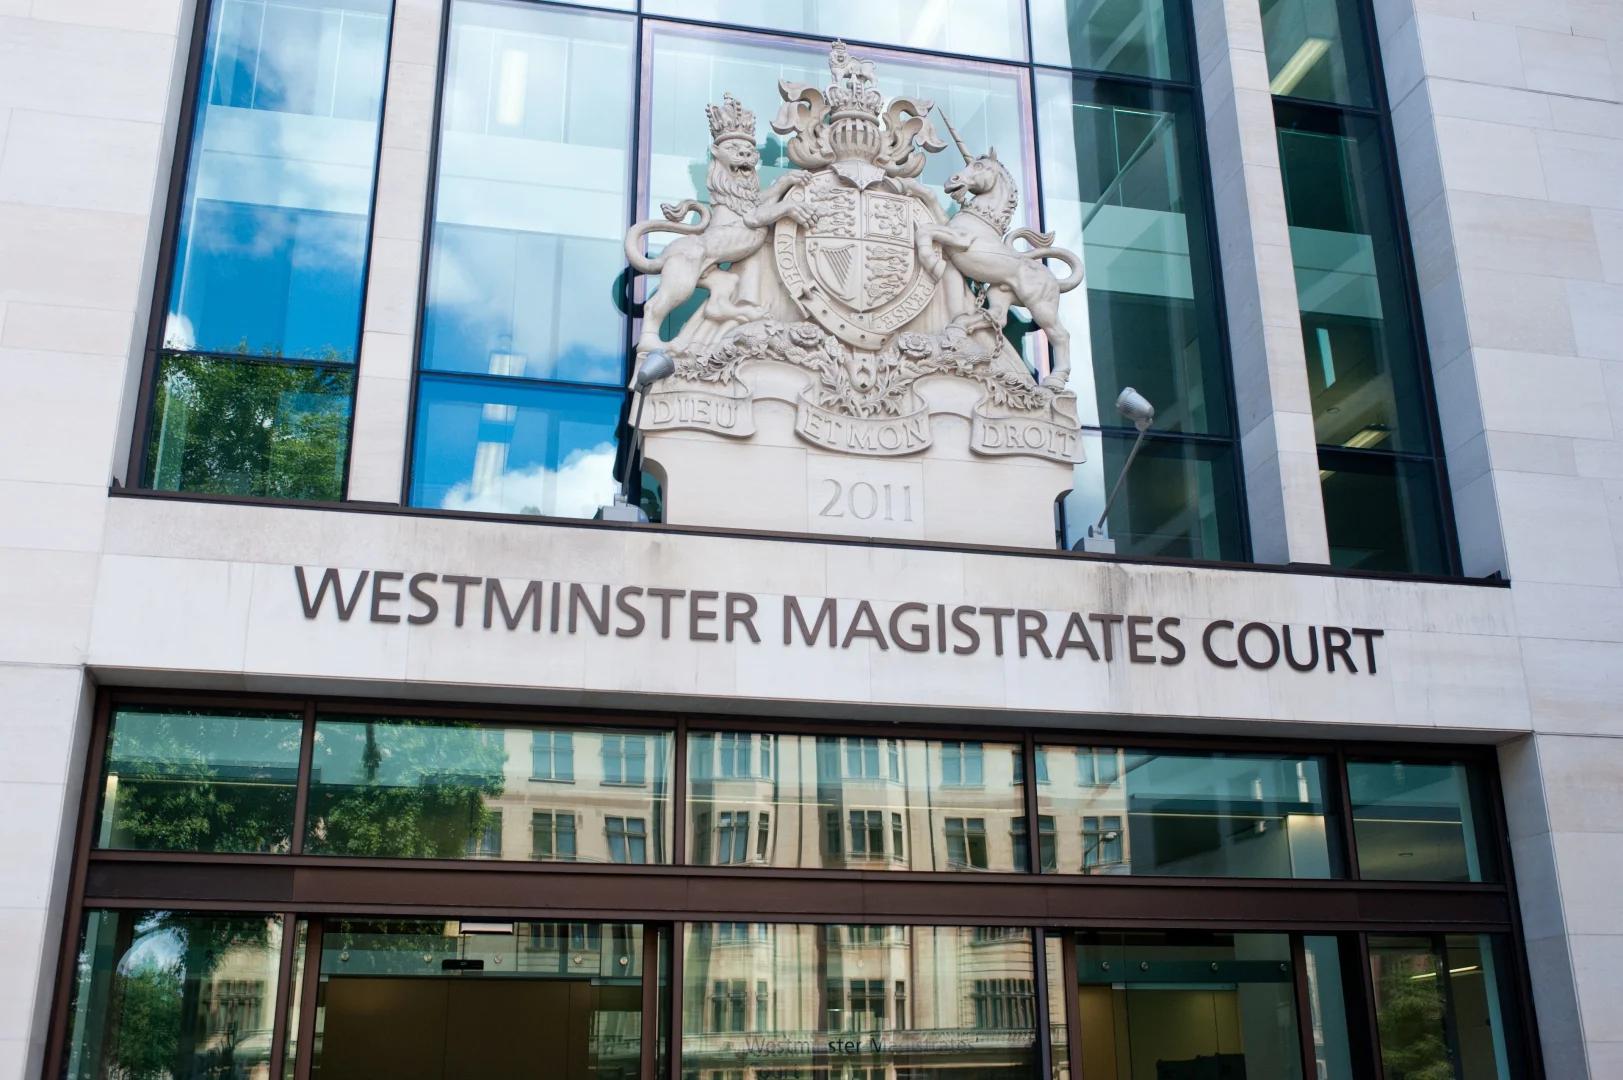 UK judge removed from bench after opposing government on COVID-19 vaccine